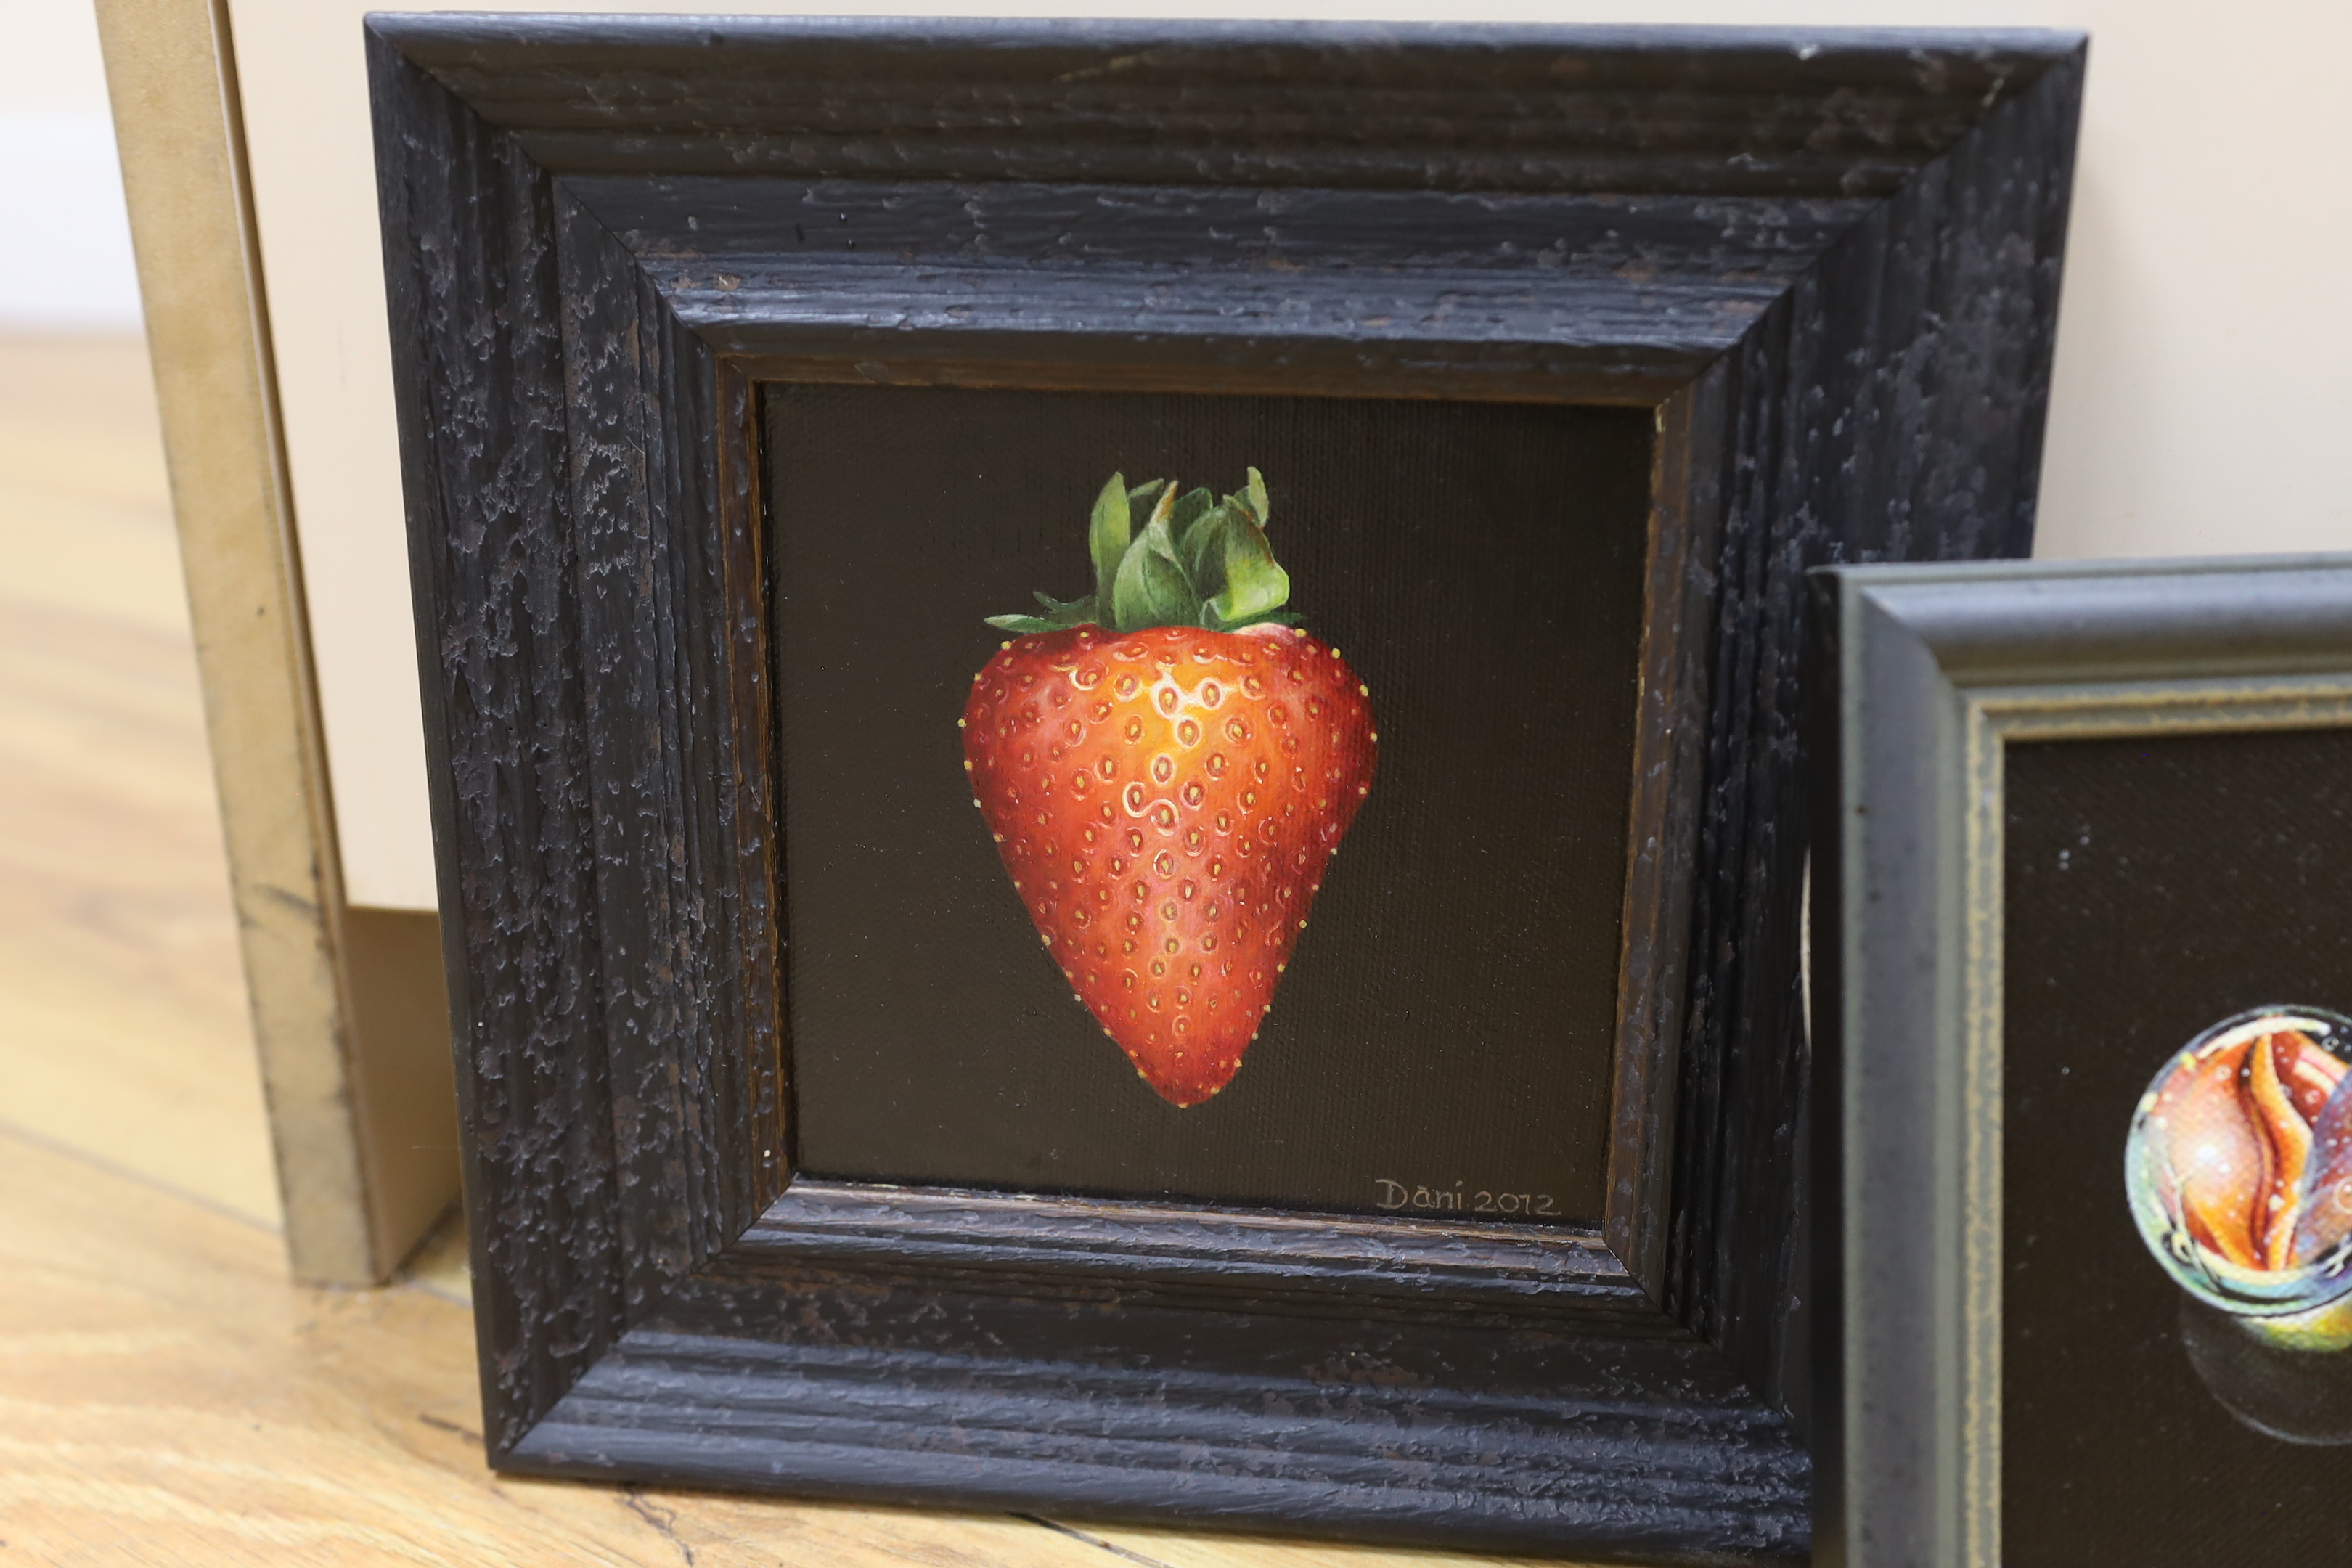 Dani Humberstone (contemporary) three oils on canvas board, Still lifes, 'Big red strawberry', 'Marbles No1' and 'Marbles No2', each signed and dated, largest 12 x 11cm